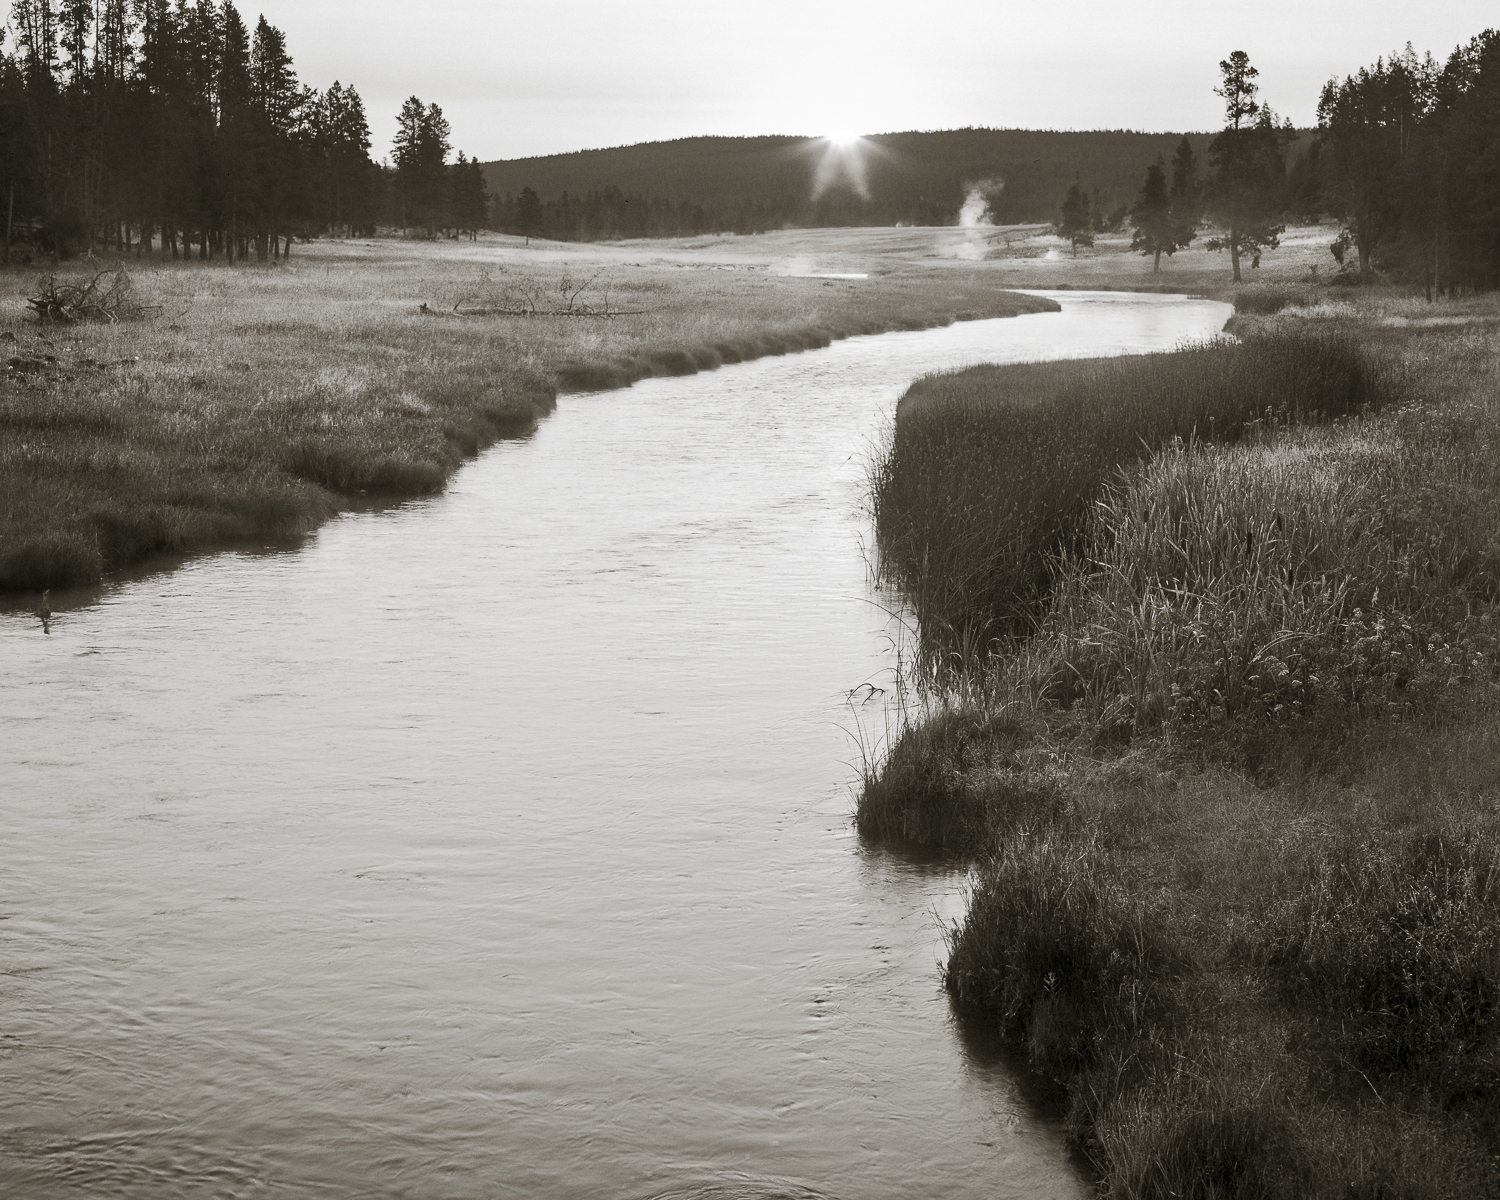 B&W fine art image of the Nez Perce River in Yellowstone NP